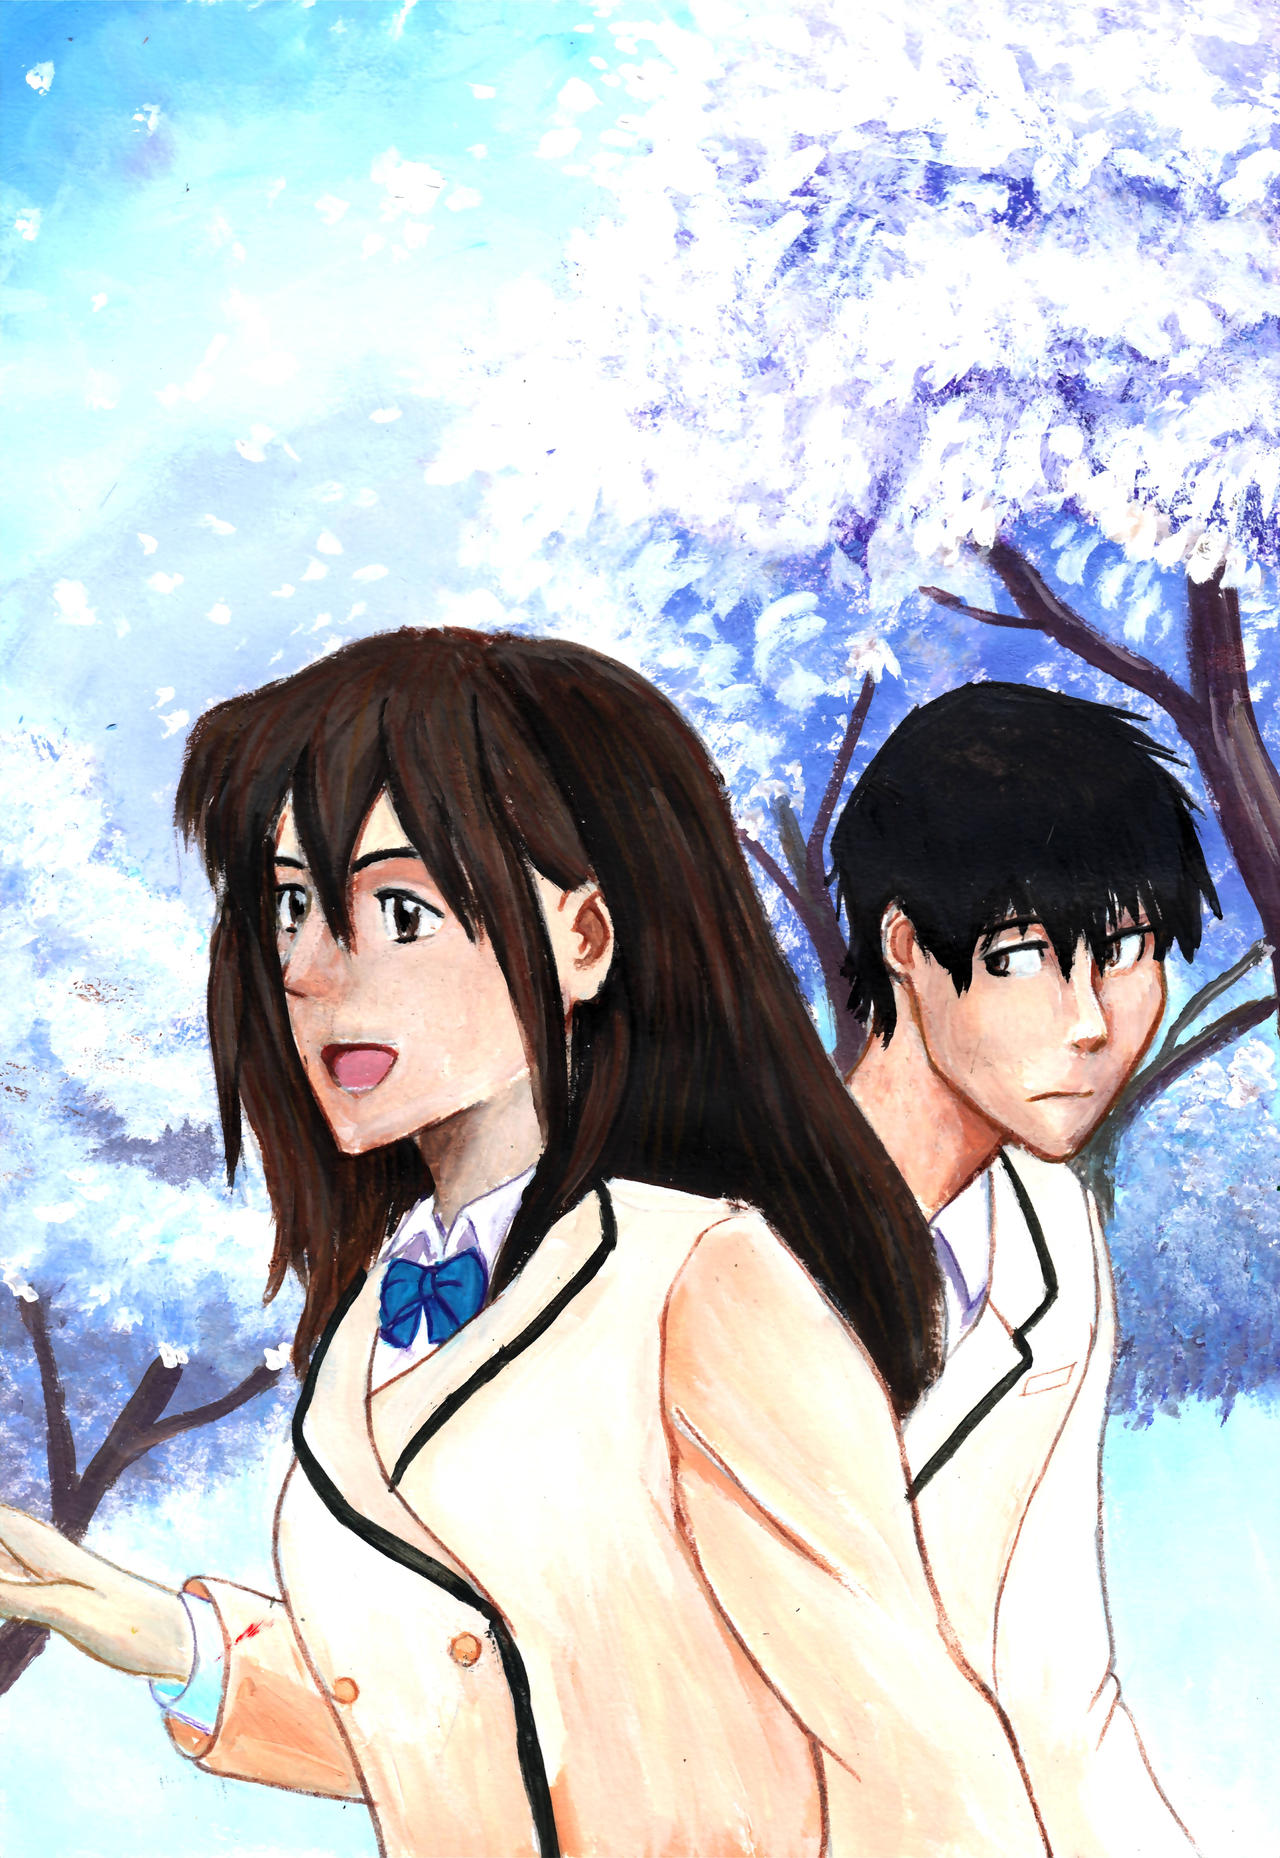 I want to eat your Pancreas by grim1978 on DeviantArt